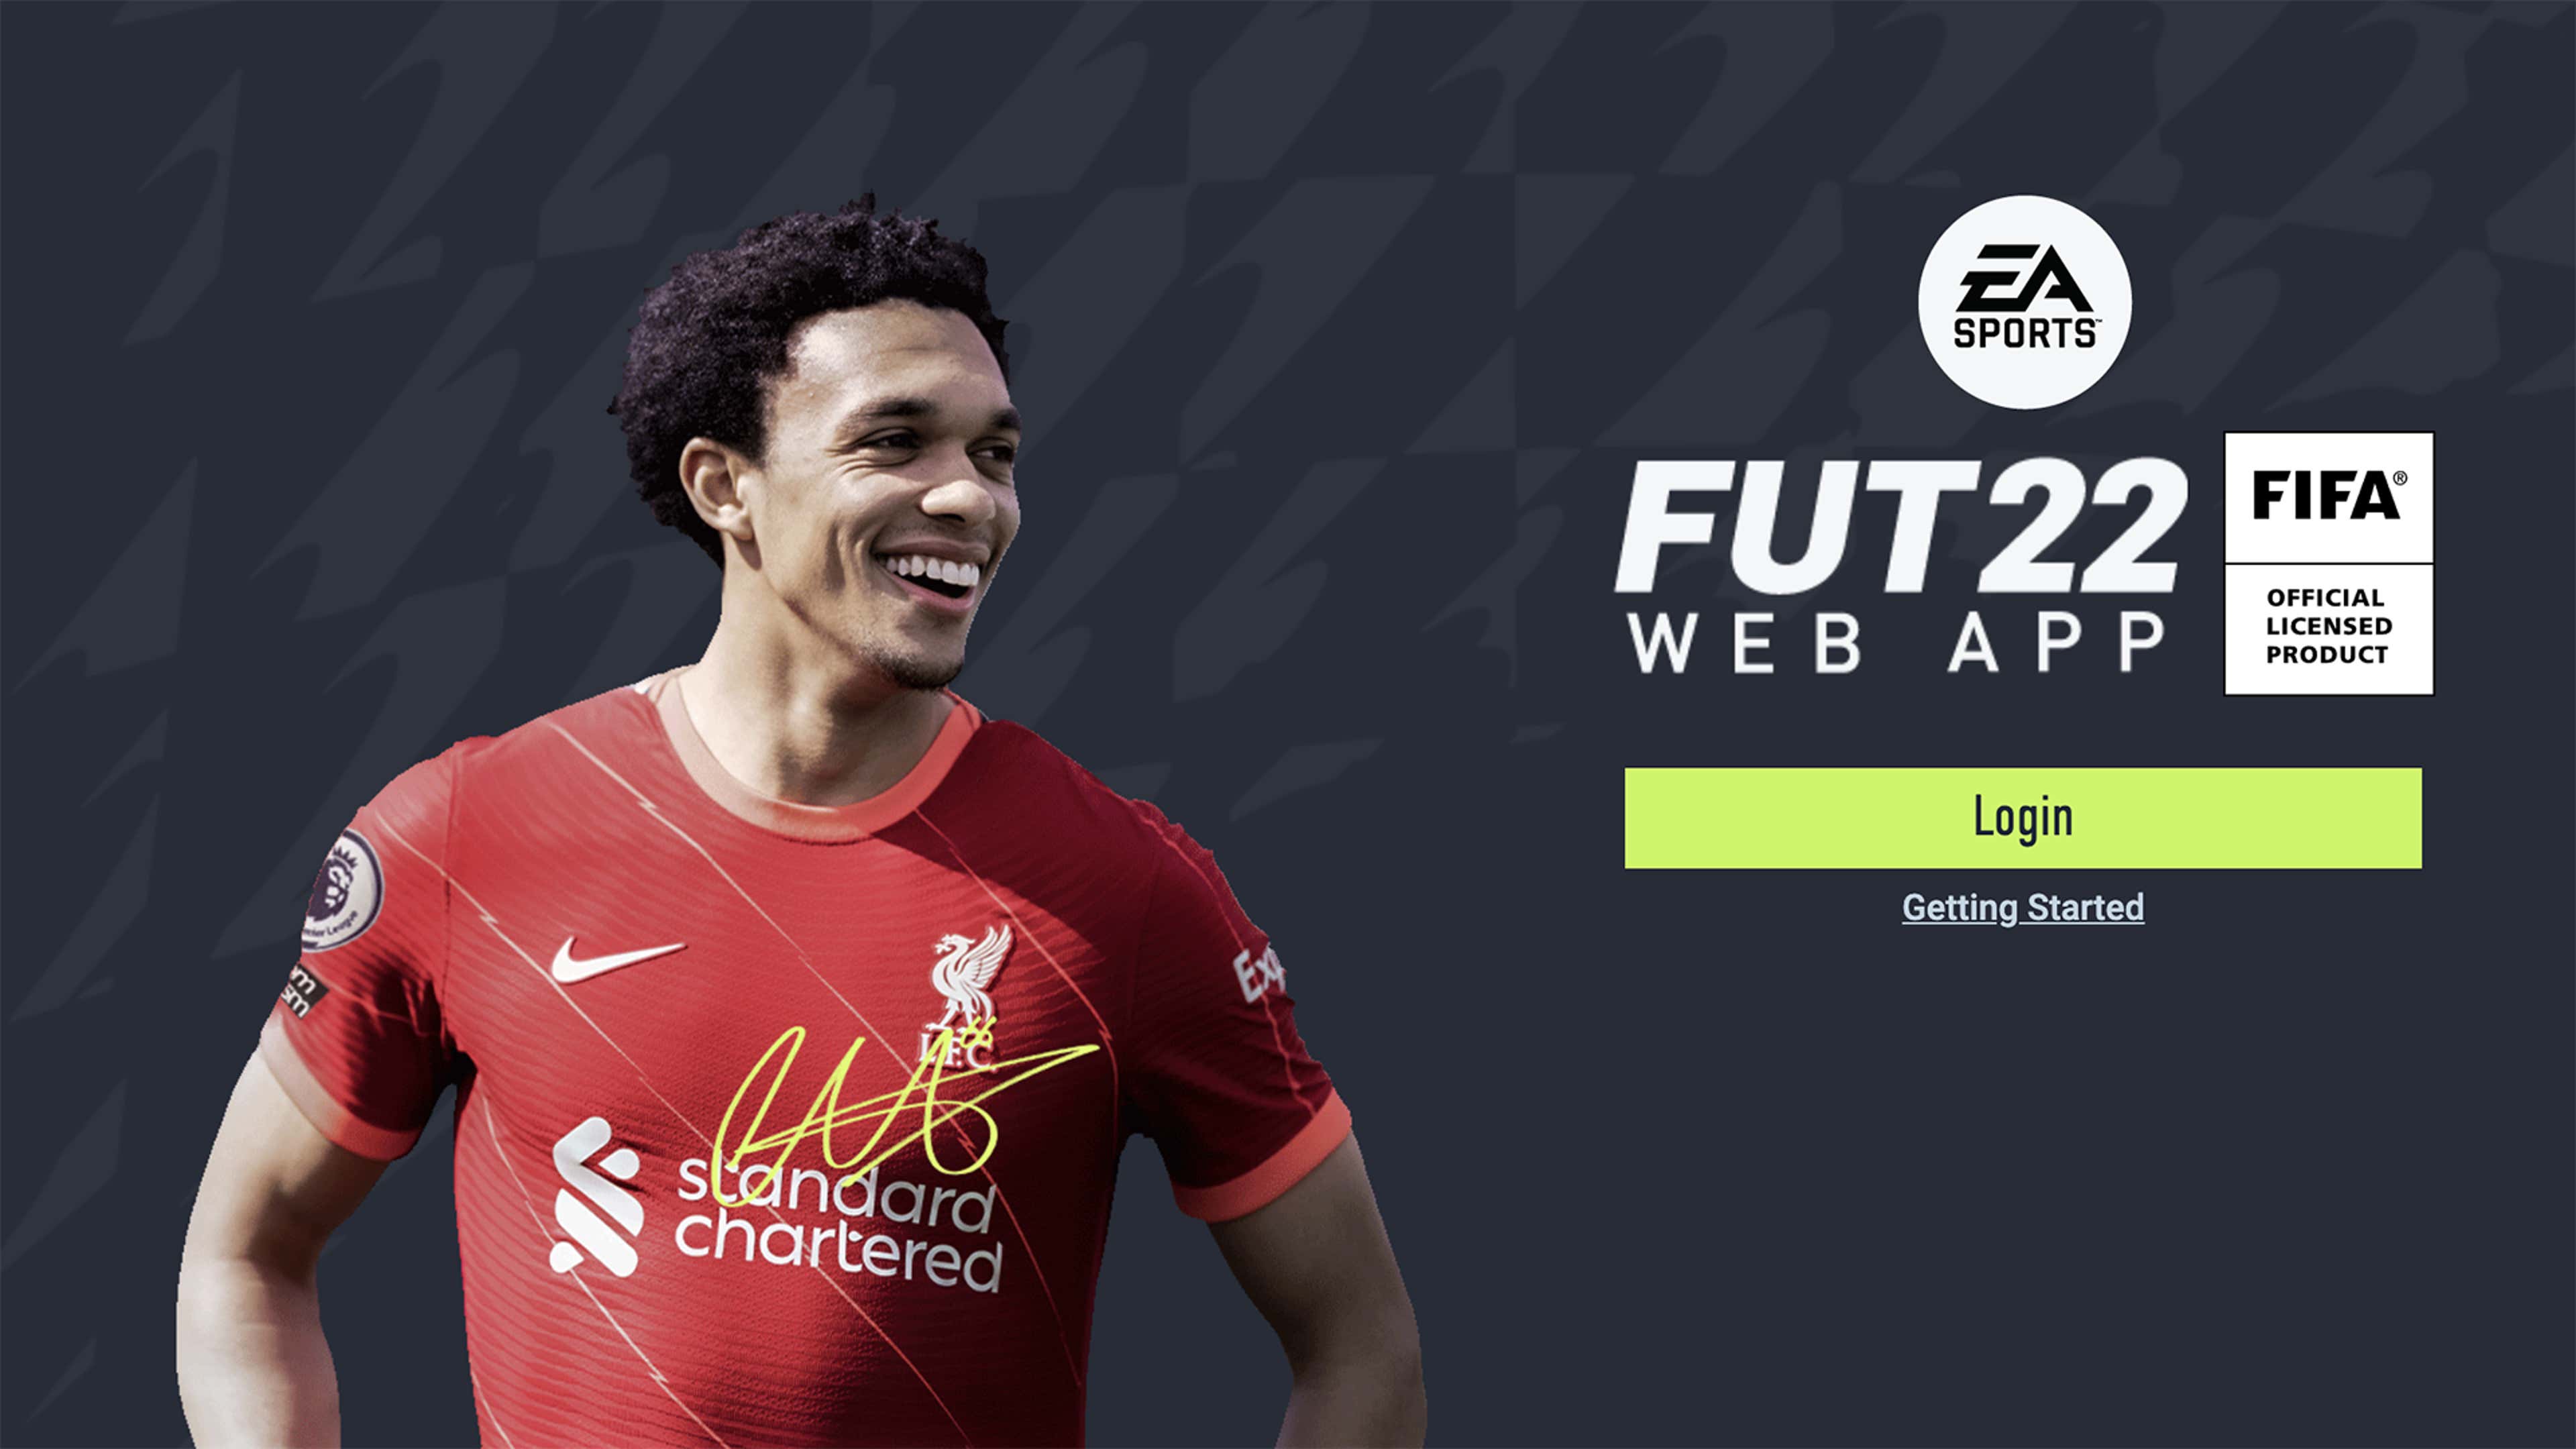 You'll no longer be able to trade with your buddies in FIFA